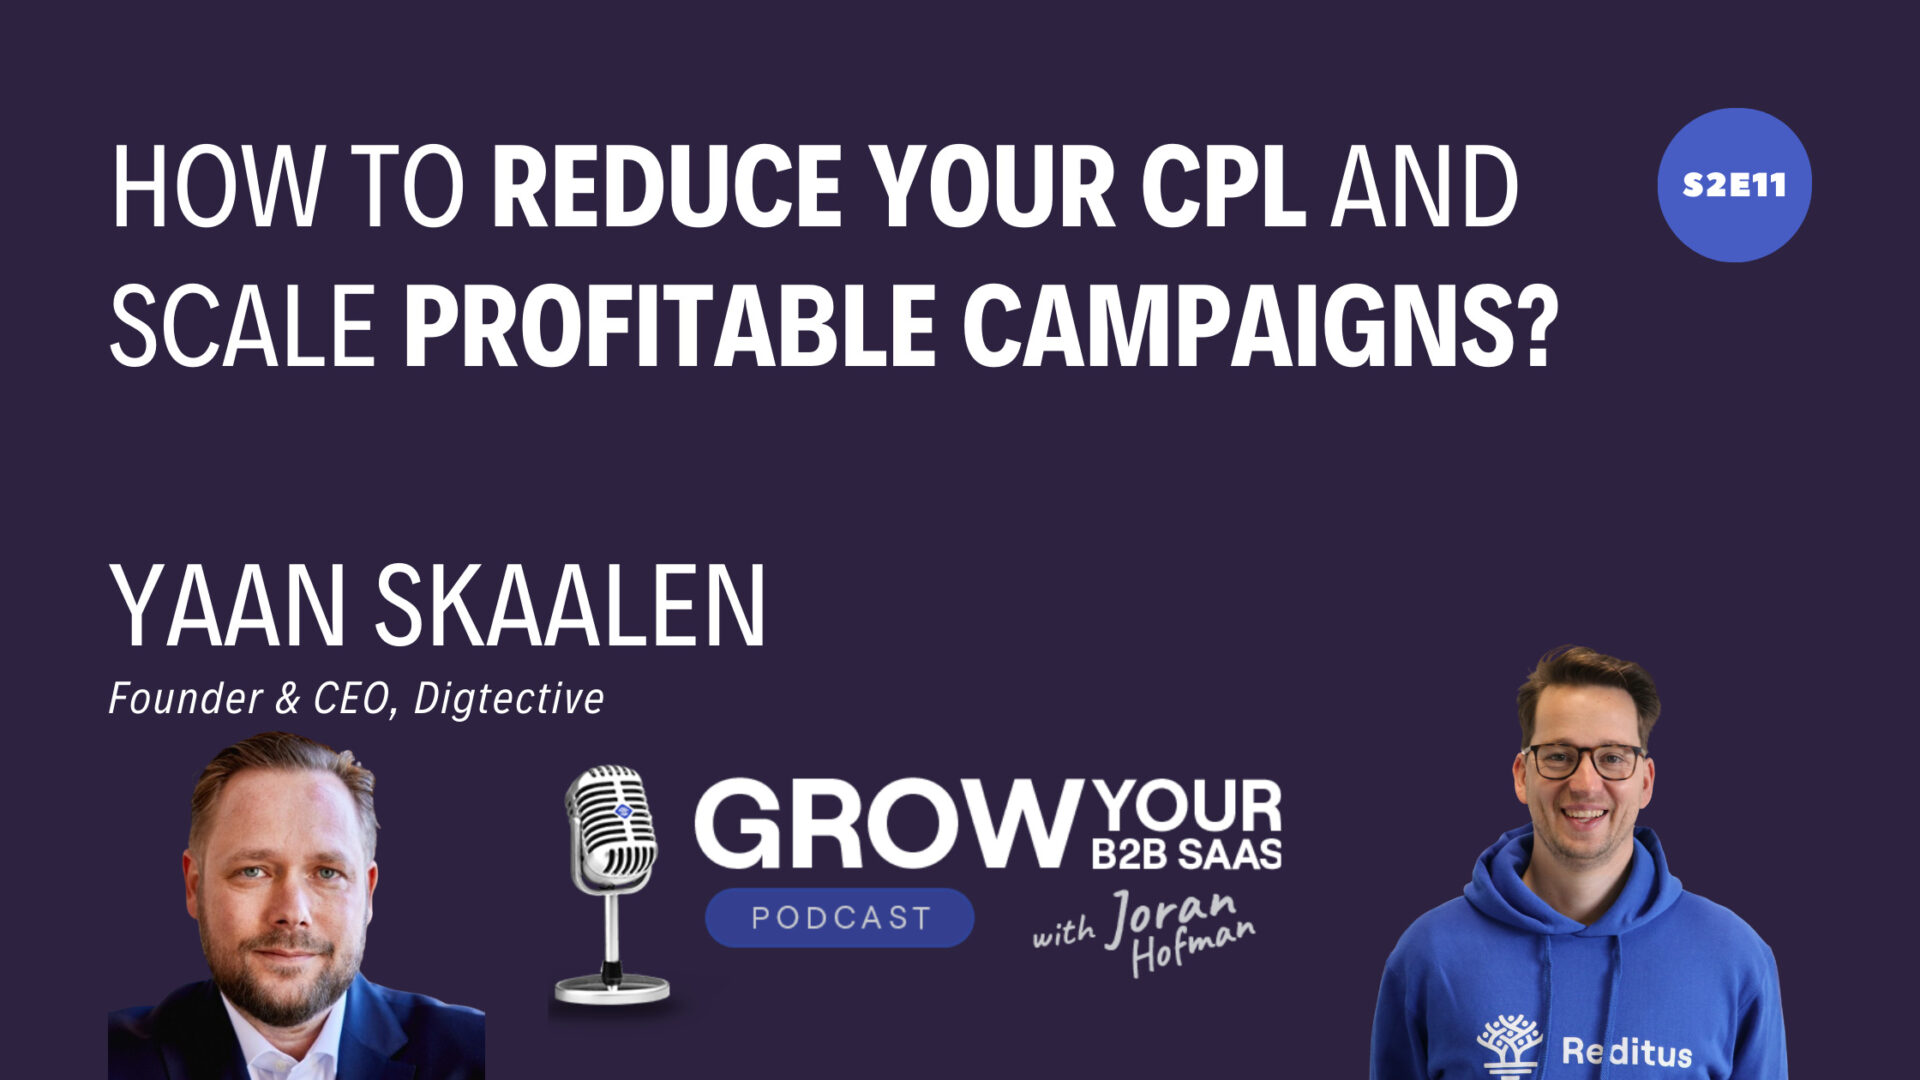 S2E11 – How to reduce your CPL and scale profitable campaigns with Yann Skaalen